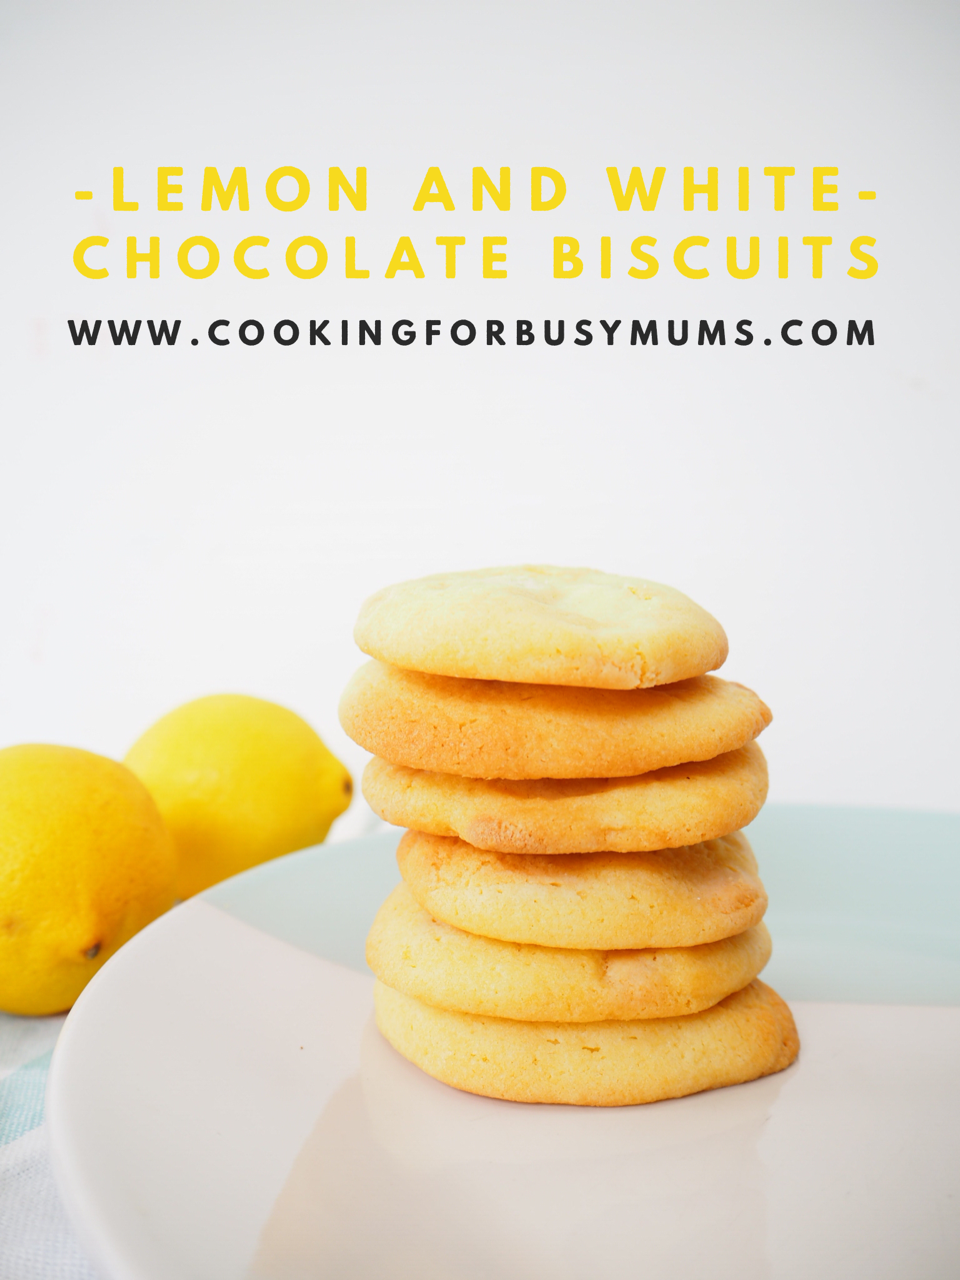 Lemon and White Chocolate Biscuits